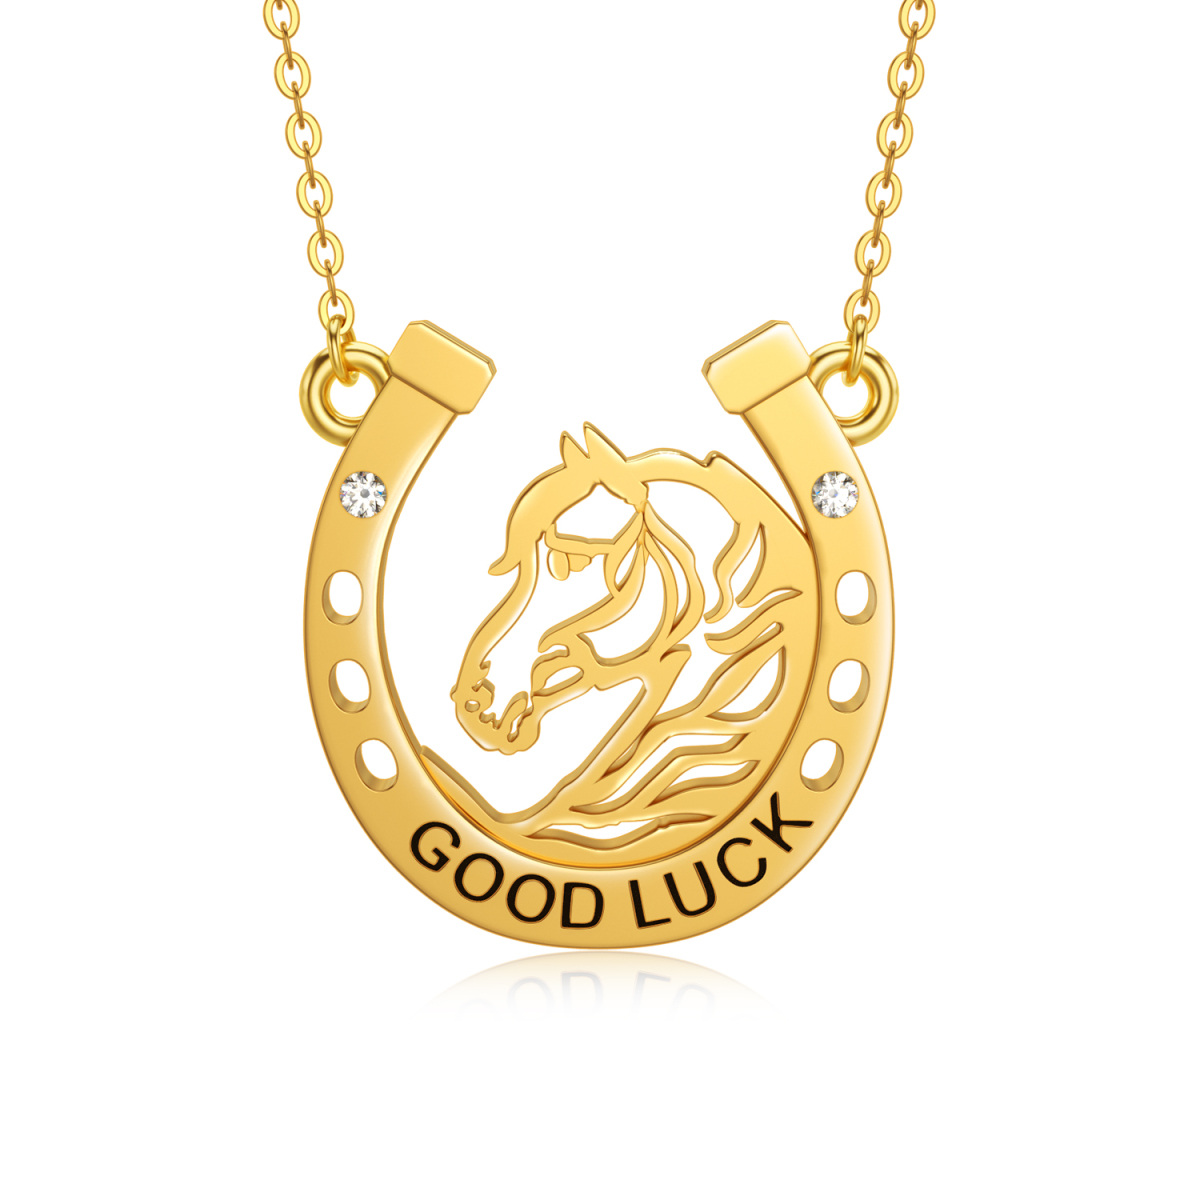 14K Gold Circular Shaped Cubic Zirconia Horse & Horseshoe Pendant Necklace with Engraved Word-1